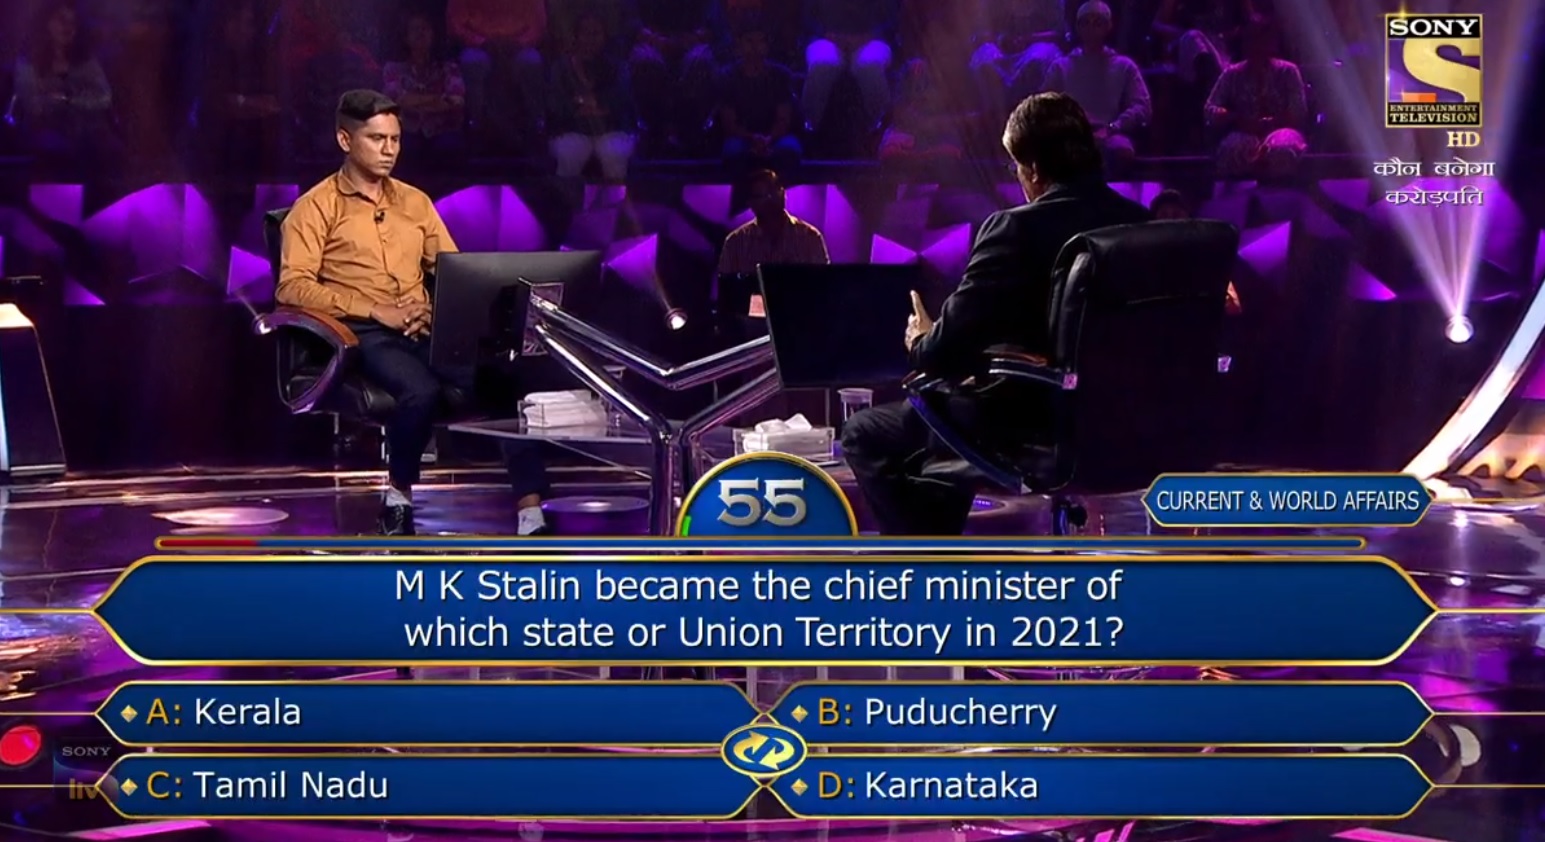 Ques : M K Stalin became the chief minister of which state or Union Territory in 2021?